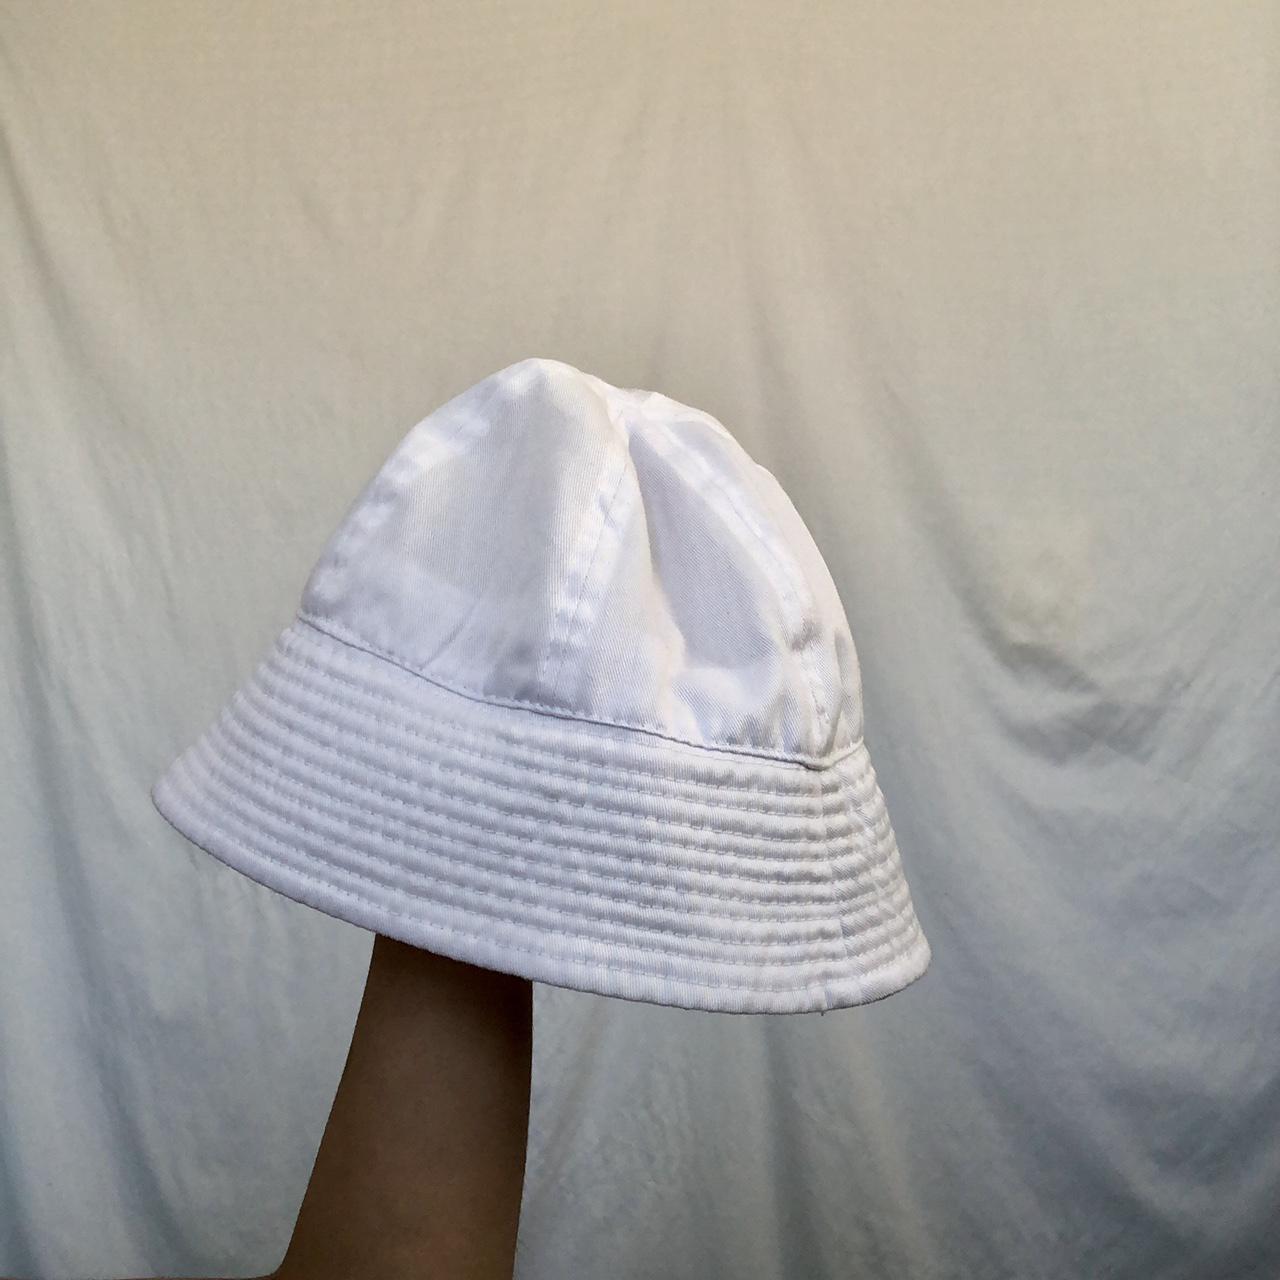 Product Image 3 - White bucket hat
+$4.05 ship 

Unbranded